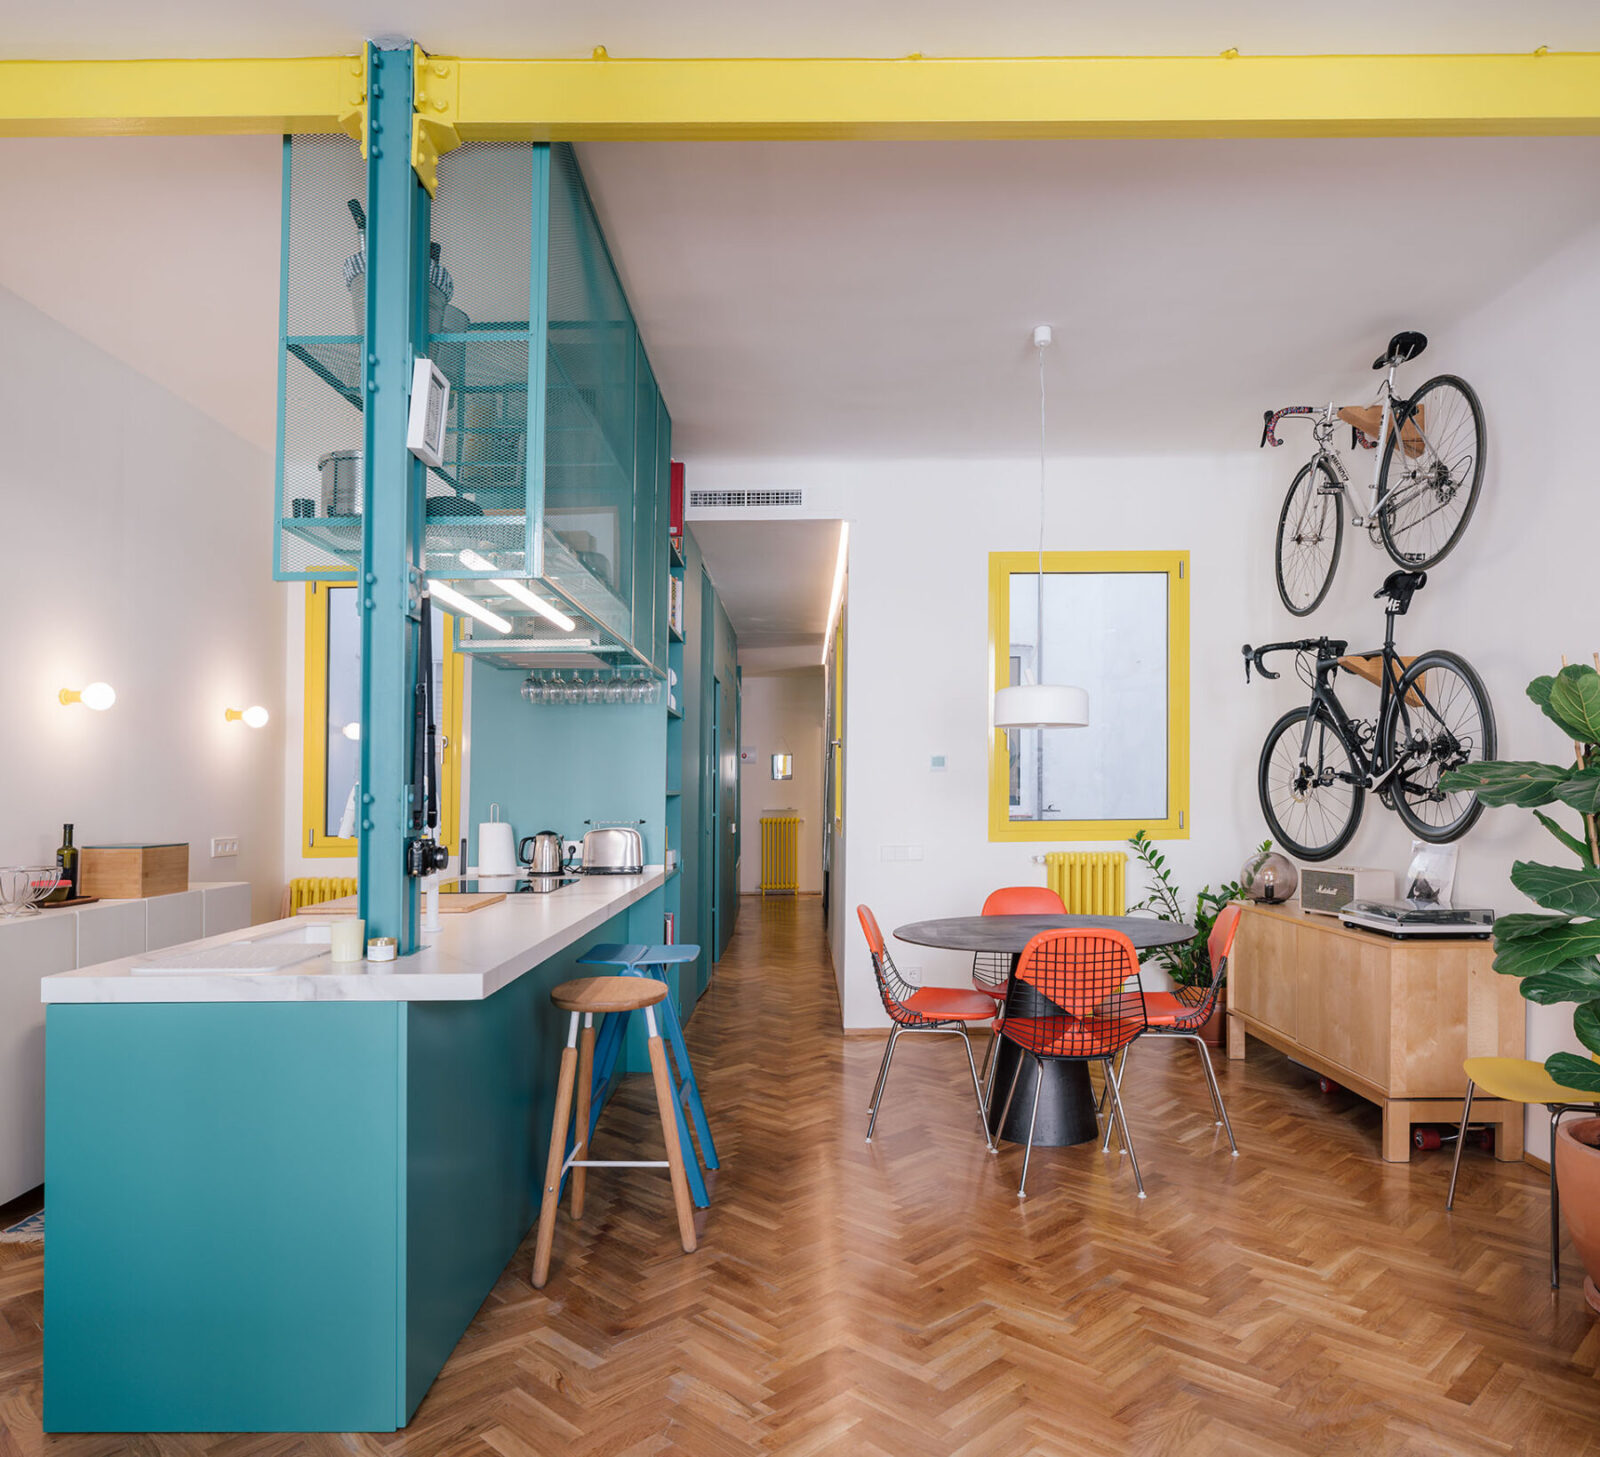 Archisearch The Magic Wall apartment renovation in Madrid, Spain | Impepinable